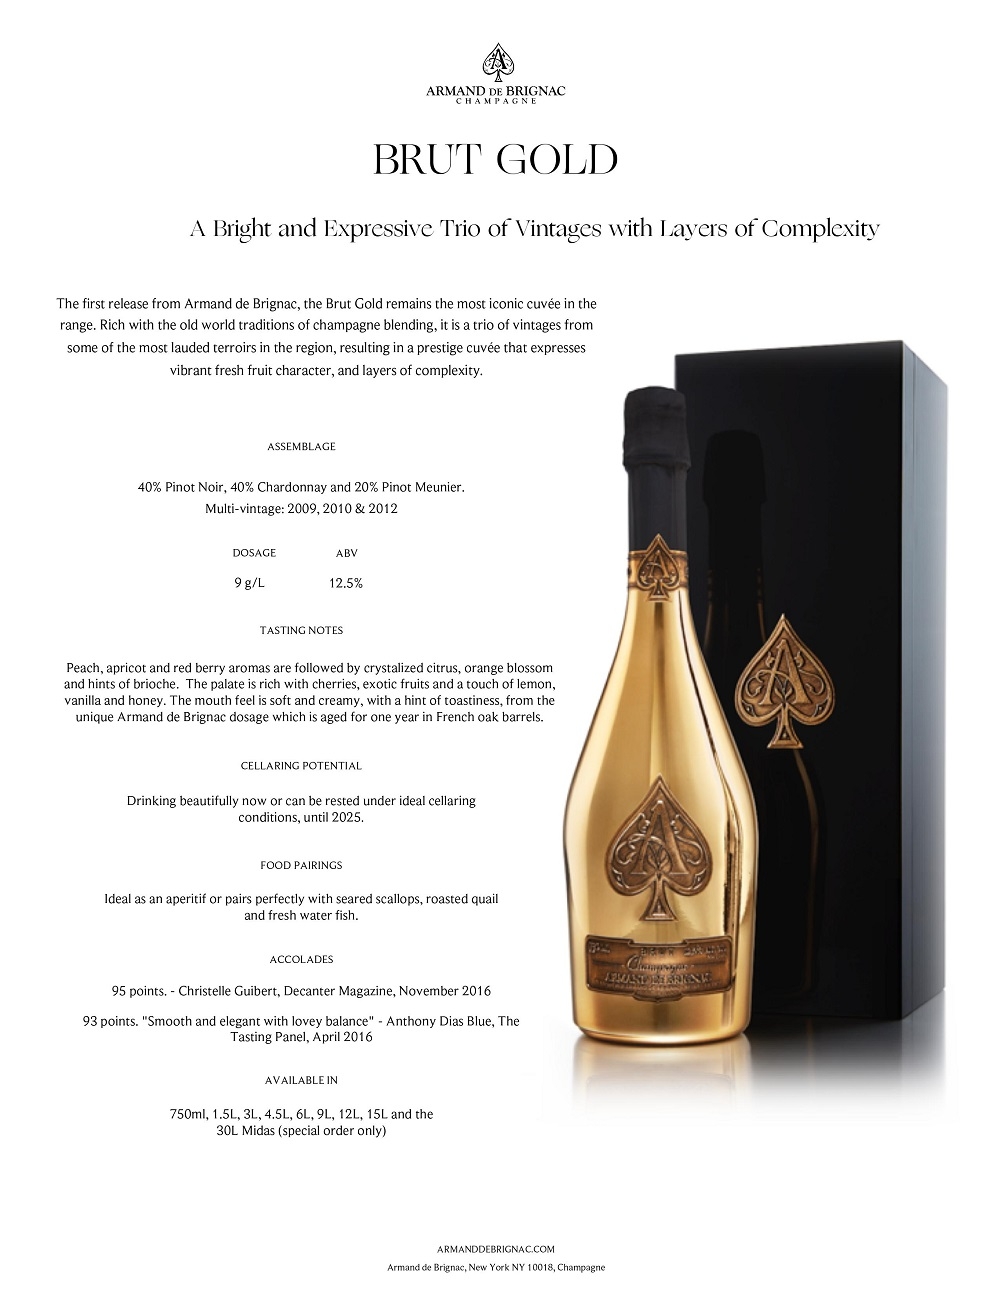 A Bright and Expressive Trio of Vintages with Layers of Complexity
The first release from Armand de Brignac, the Brut Gold remains the most iconic cuvée in the
range. Rich with the old world traditions of champagne blending, it is a trio of vintages from
some of the most lauded terroirs in the region, resulting in a prestige cuvée that expresses
vibrant fresh fruit character, and layers of complexity.
ASSEMBLAGE
40% Pinot Noir, 40% Chardonnay and 20% Pinot Meunier.
Multi-vintage: 2009, 2010 & 2012
Peach, apricot and red berry aromas are followed by crystalized citrus, orange blossom
and hints of brioche. The palate is rich with cherries, exotic fruits and a touch of lemon,
vanilla and honey. The mouth feel is soft and creamy, with a hint of toastiness, from the
unique Armand de Brignac dosage which is aged for one year in French oak barrels.
TASTING NOTES
Ideal as an aperitif or pairs perfectly with seared scallops, roasted quail
and fresh water fish.
FOOD PAIRINGS
Drinking beautifully now or can be rested under ideal cellaring
conditions, until 2025.
CELLARING POTENTIAL
AVAILABLE IN
BRUT GOLD
95 points. - Christelle Guibert, Decanter Magazine, November 2016
93 points. 